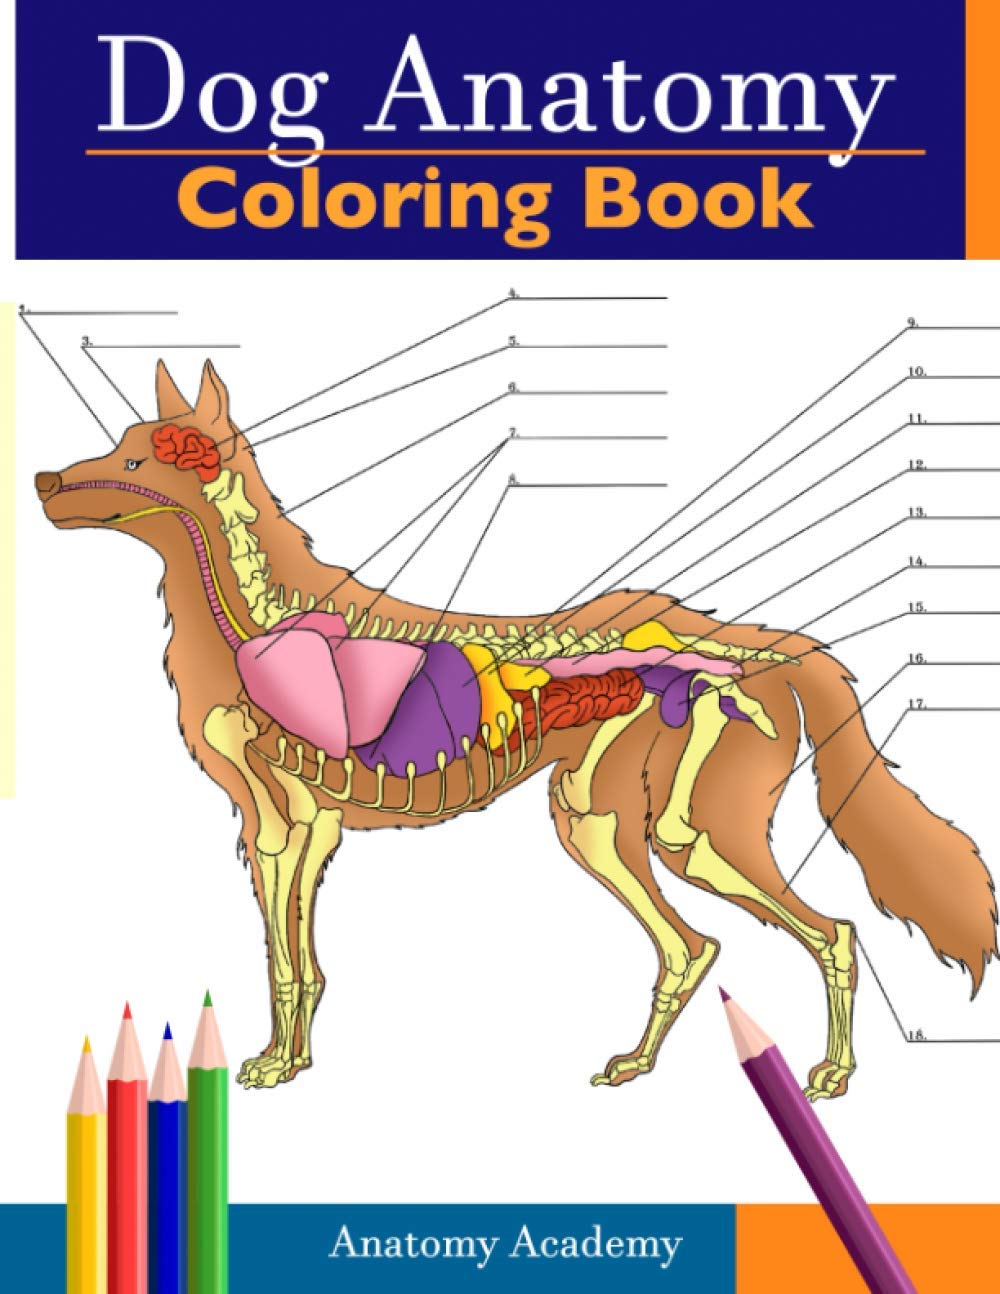 Dog Anatomy Coloring Book: Incredibly Detailed Self-Test Canine Anatomy Color Workbook